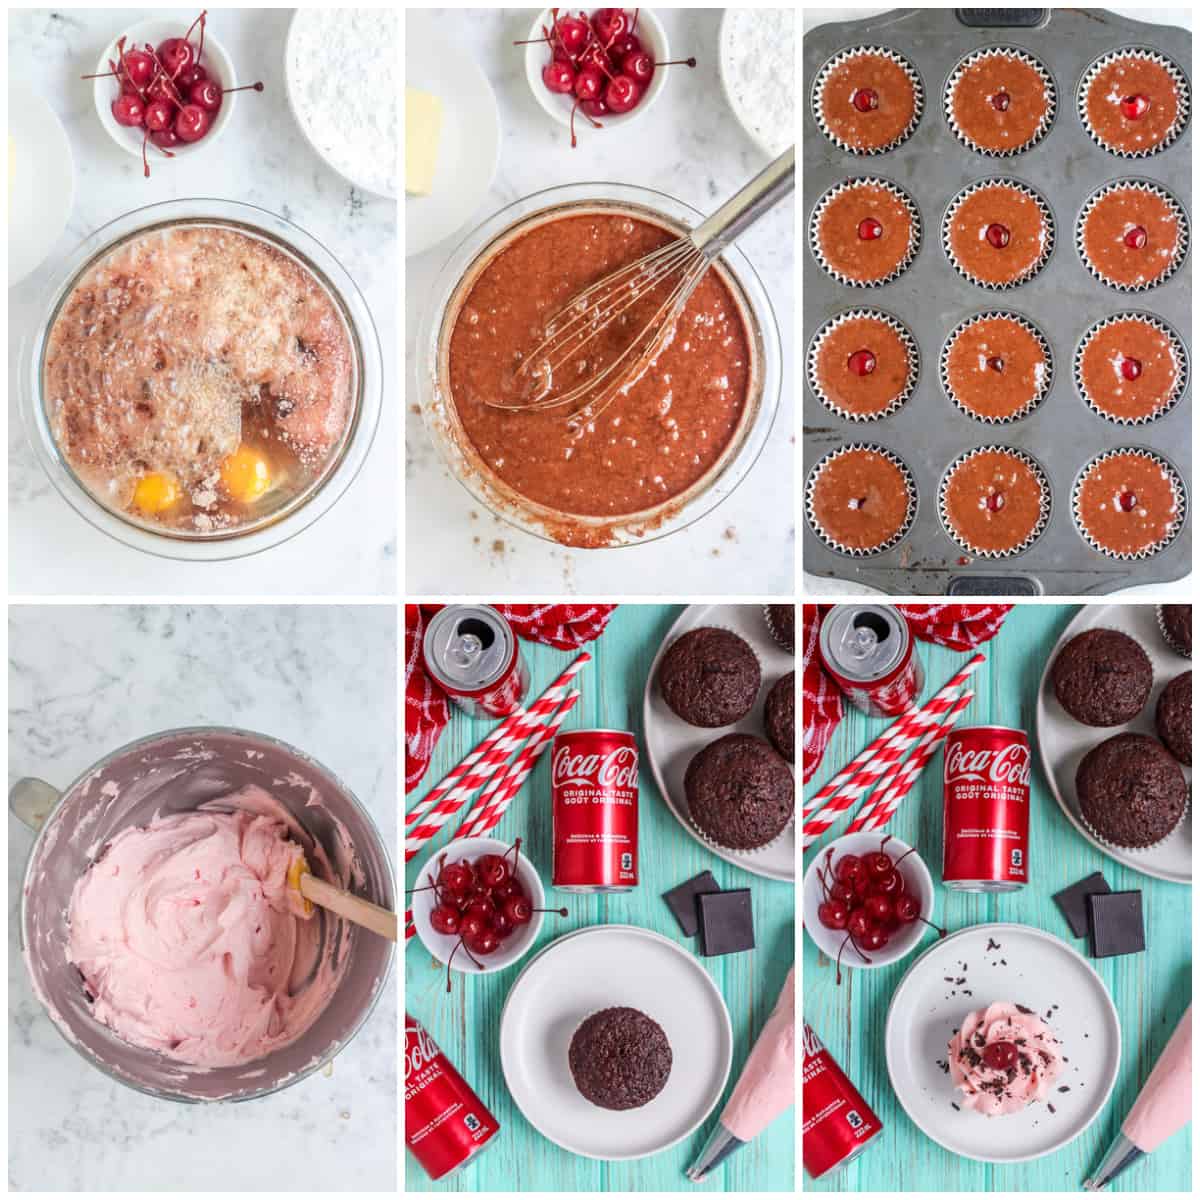 Step by step photos on how to make Cherry Coke Cupcakes.